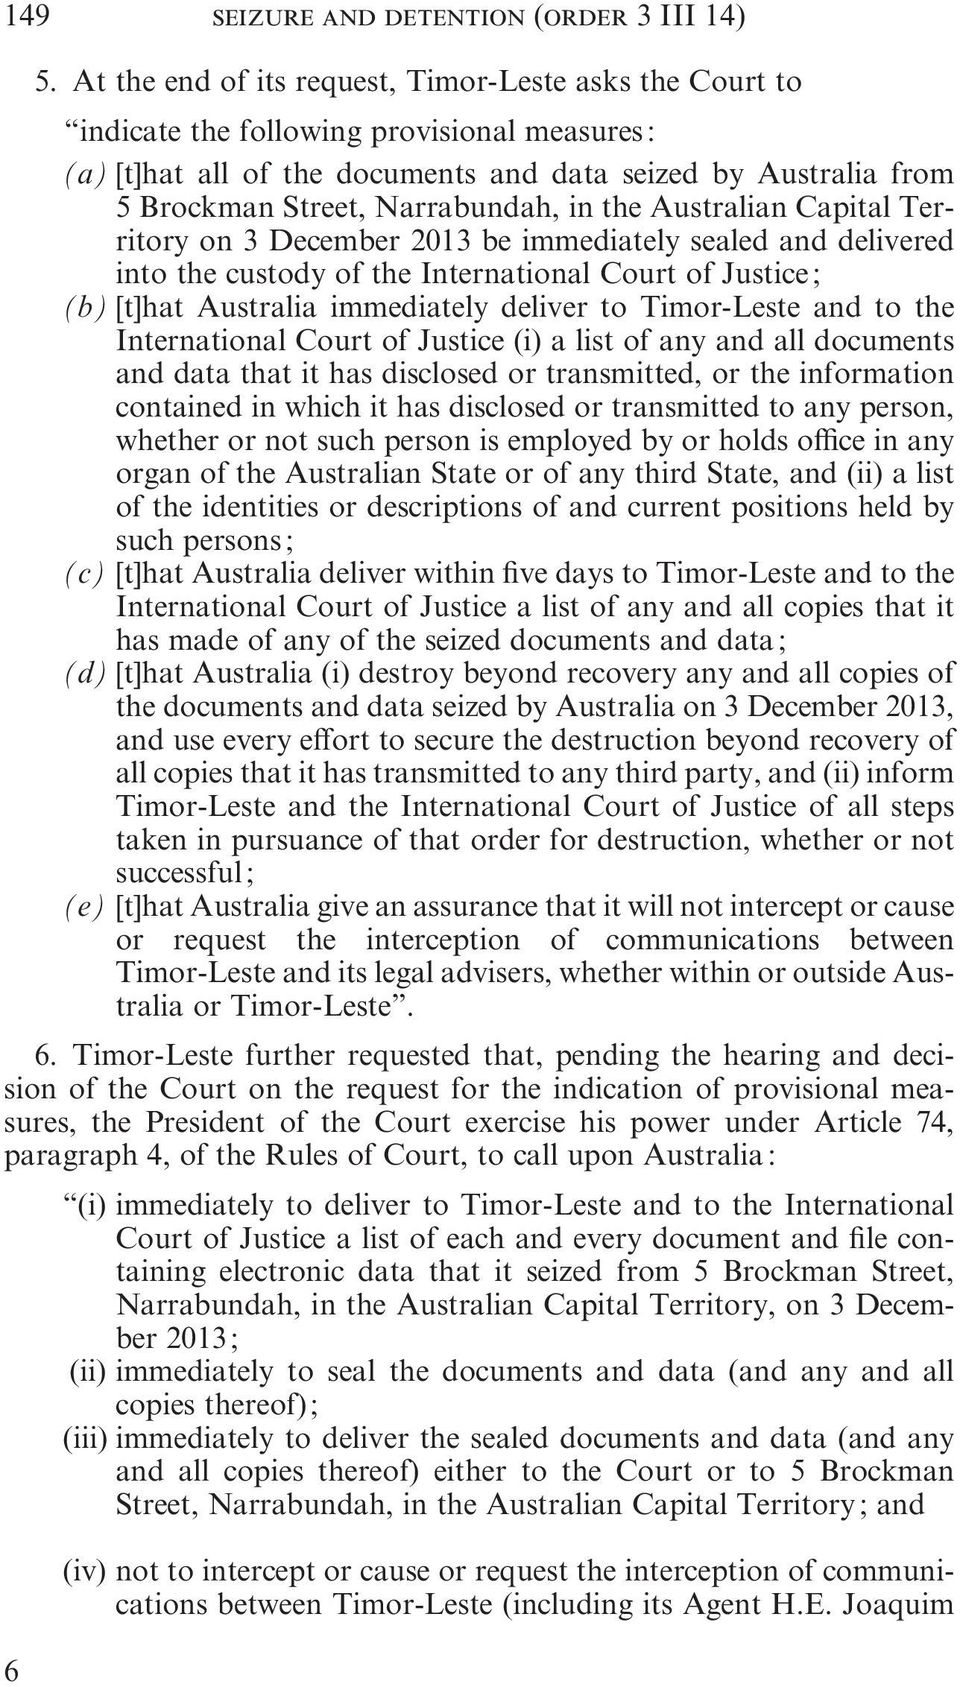 Narrabundah, in the Australian Capital Territory on 3 December 2013 be immediately sealed and delivered into the custody of the International Court of Justice ; (b) [t]hat Australia immediately